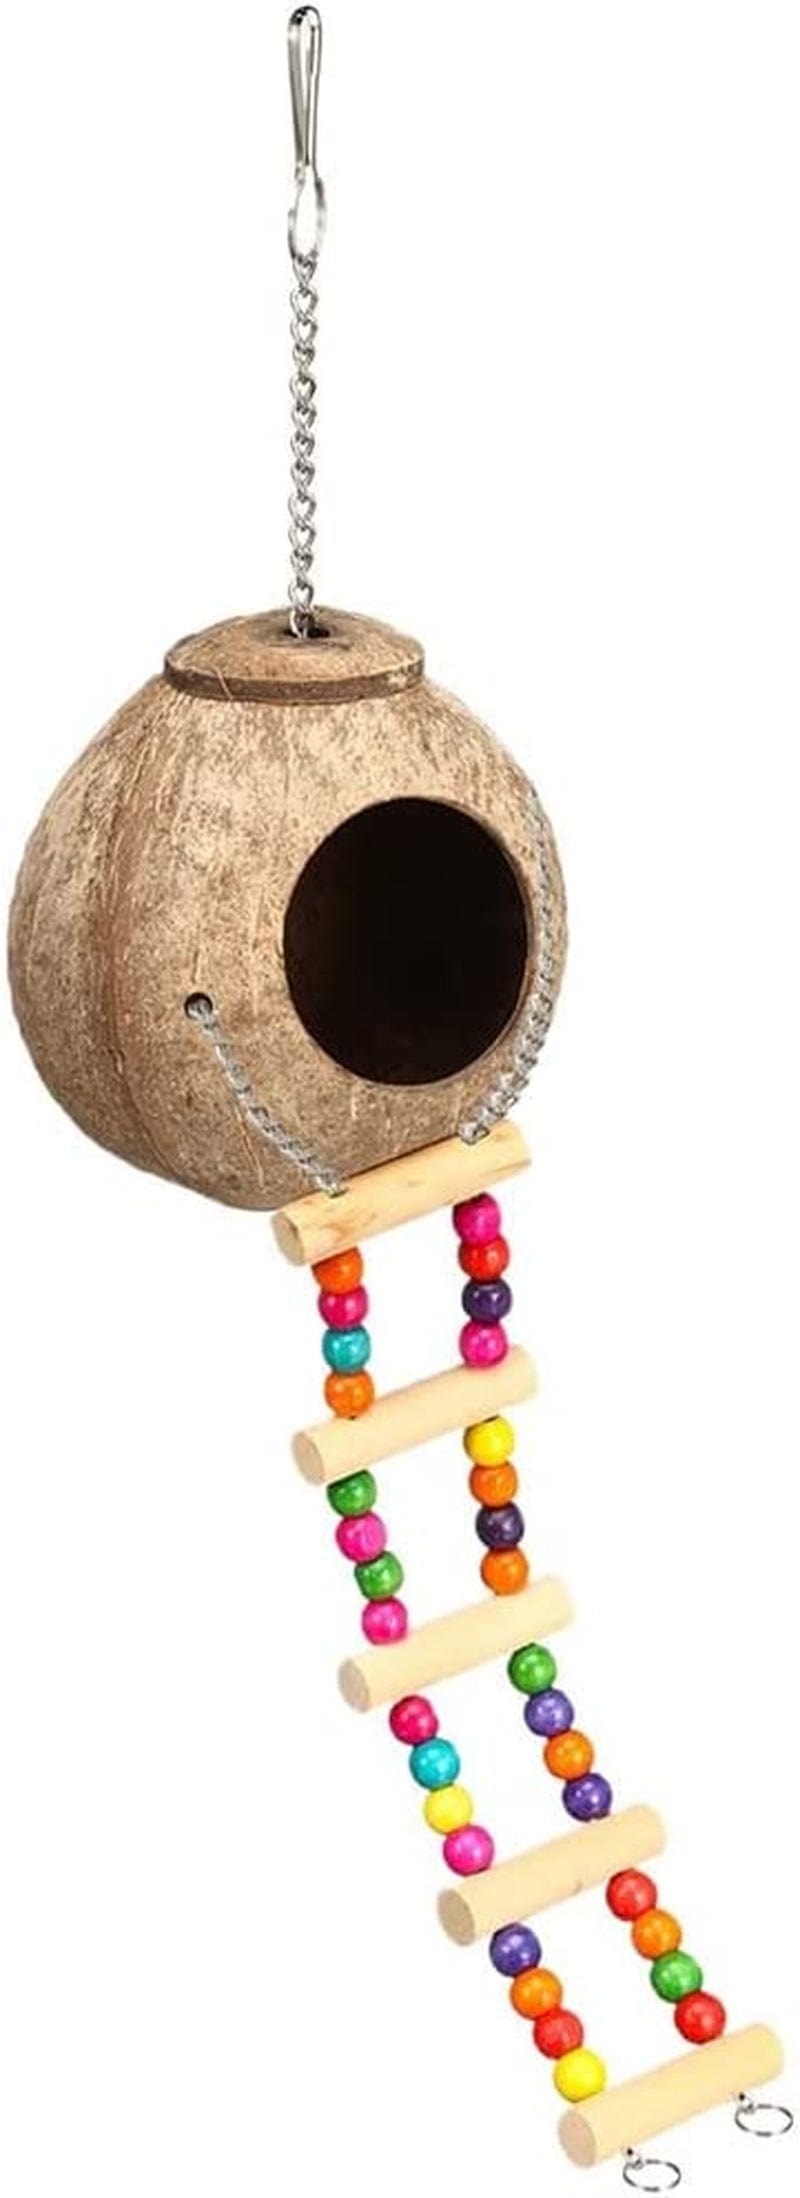 XXSLY Creative Birdcage Coconut Shell Bird Cages with Climb Ladder House Cage Nest Hanging Toys for Parrot Parakeet Lovebird Finch Canary Bird Cage Accessories (Color : Polish) Animals & Pet Supplies > Pet Supplies > Bird Supplies > Bird Cages & Stands XXSLY Polish with Ladder  